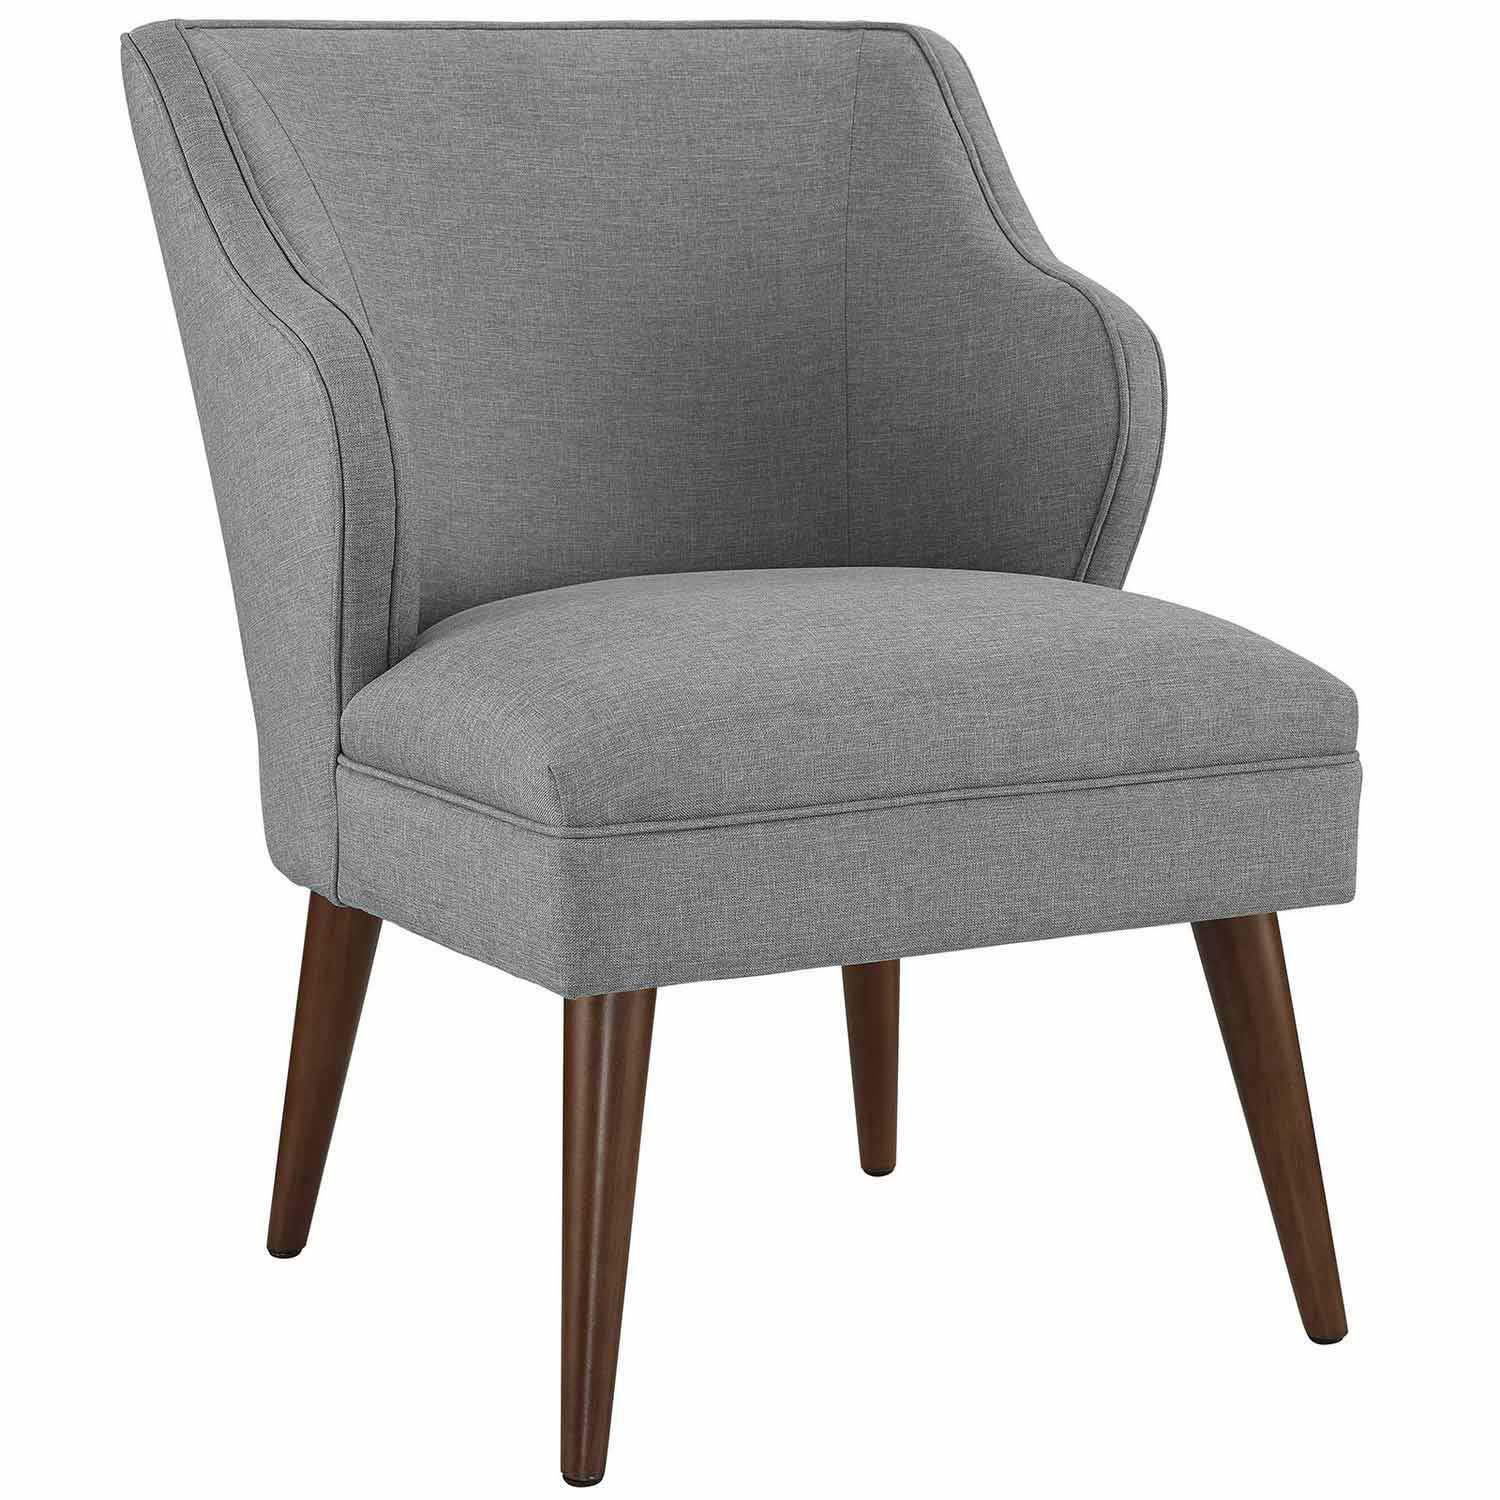 Modway Swell Fabric Arm Chair - Light Gray